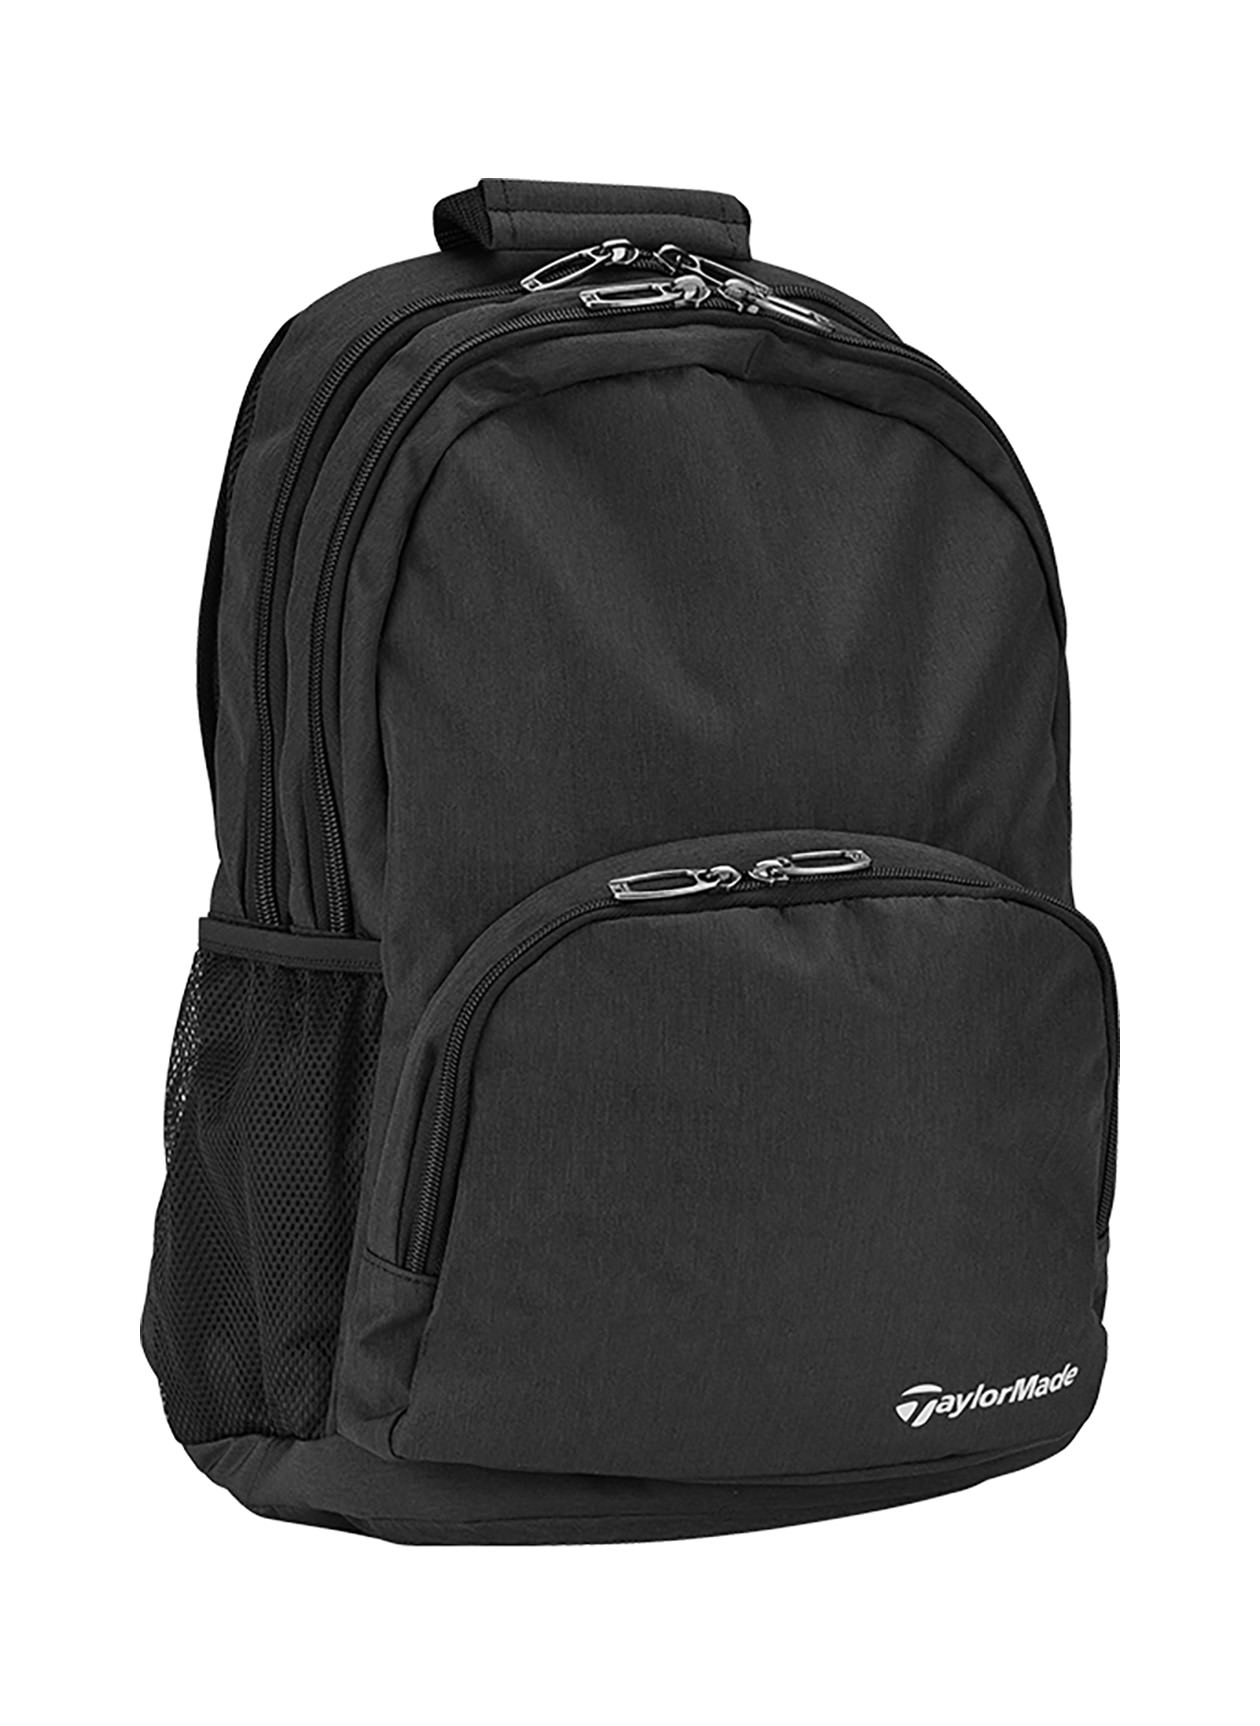 TaylorMade Black Performance Backpack